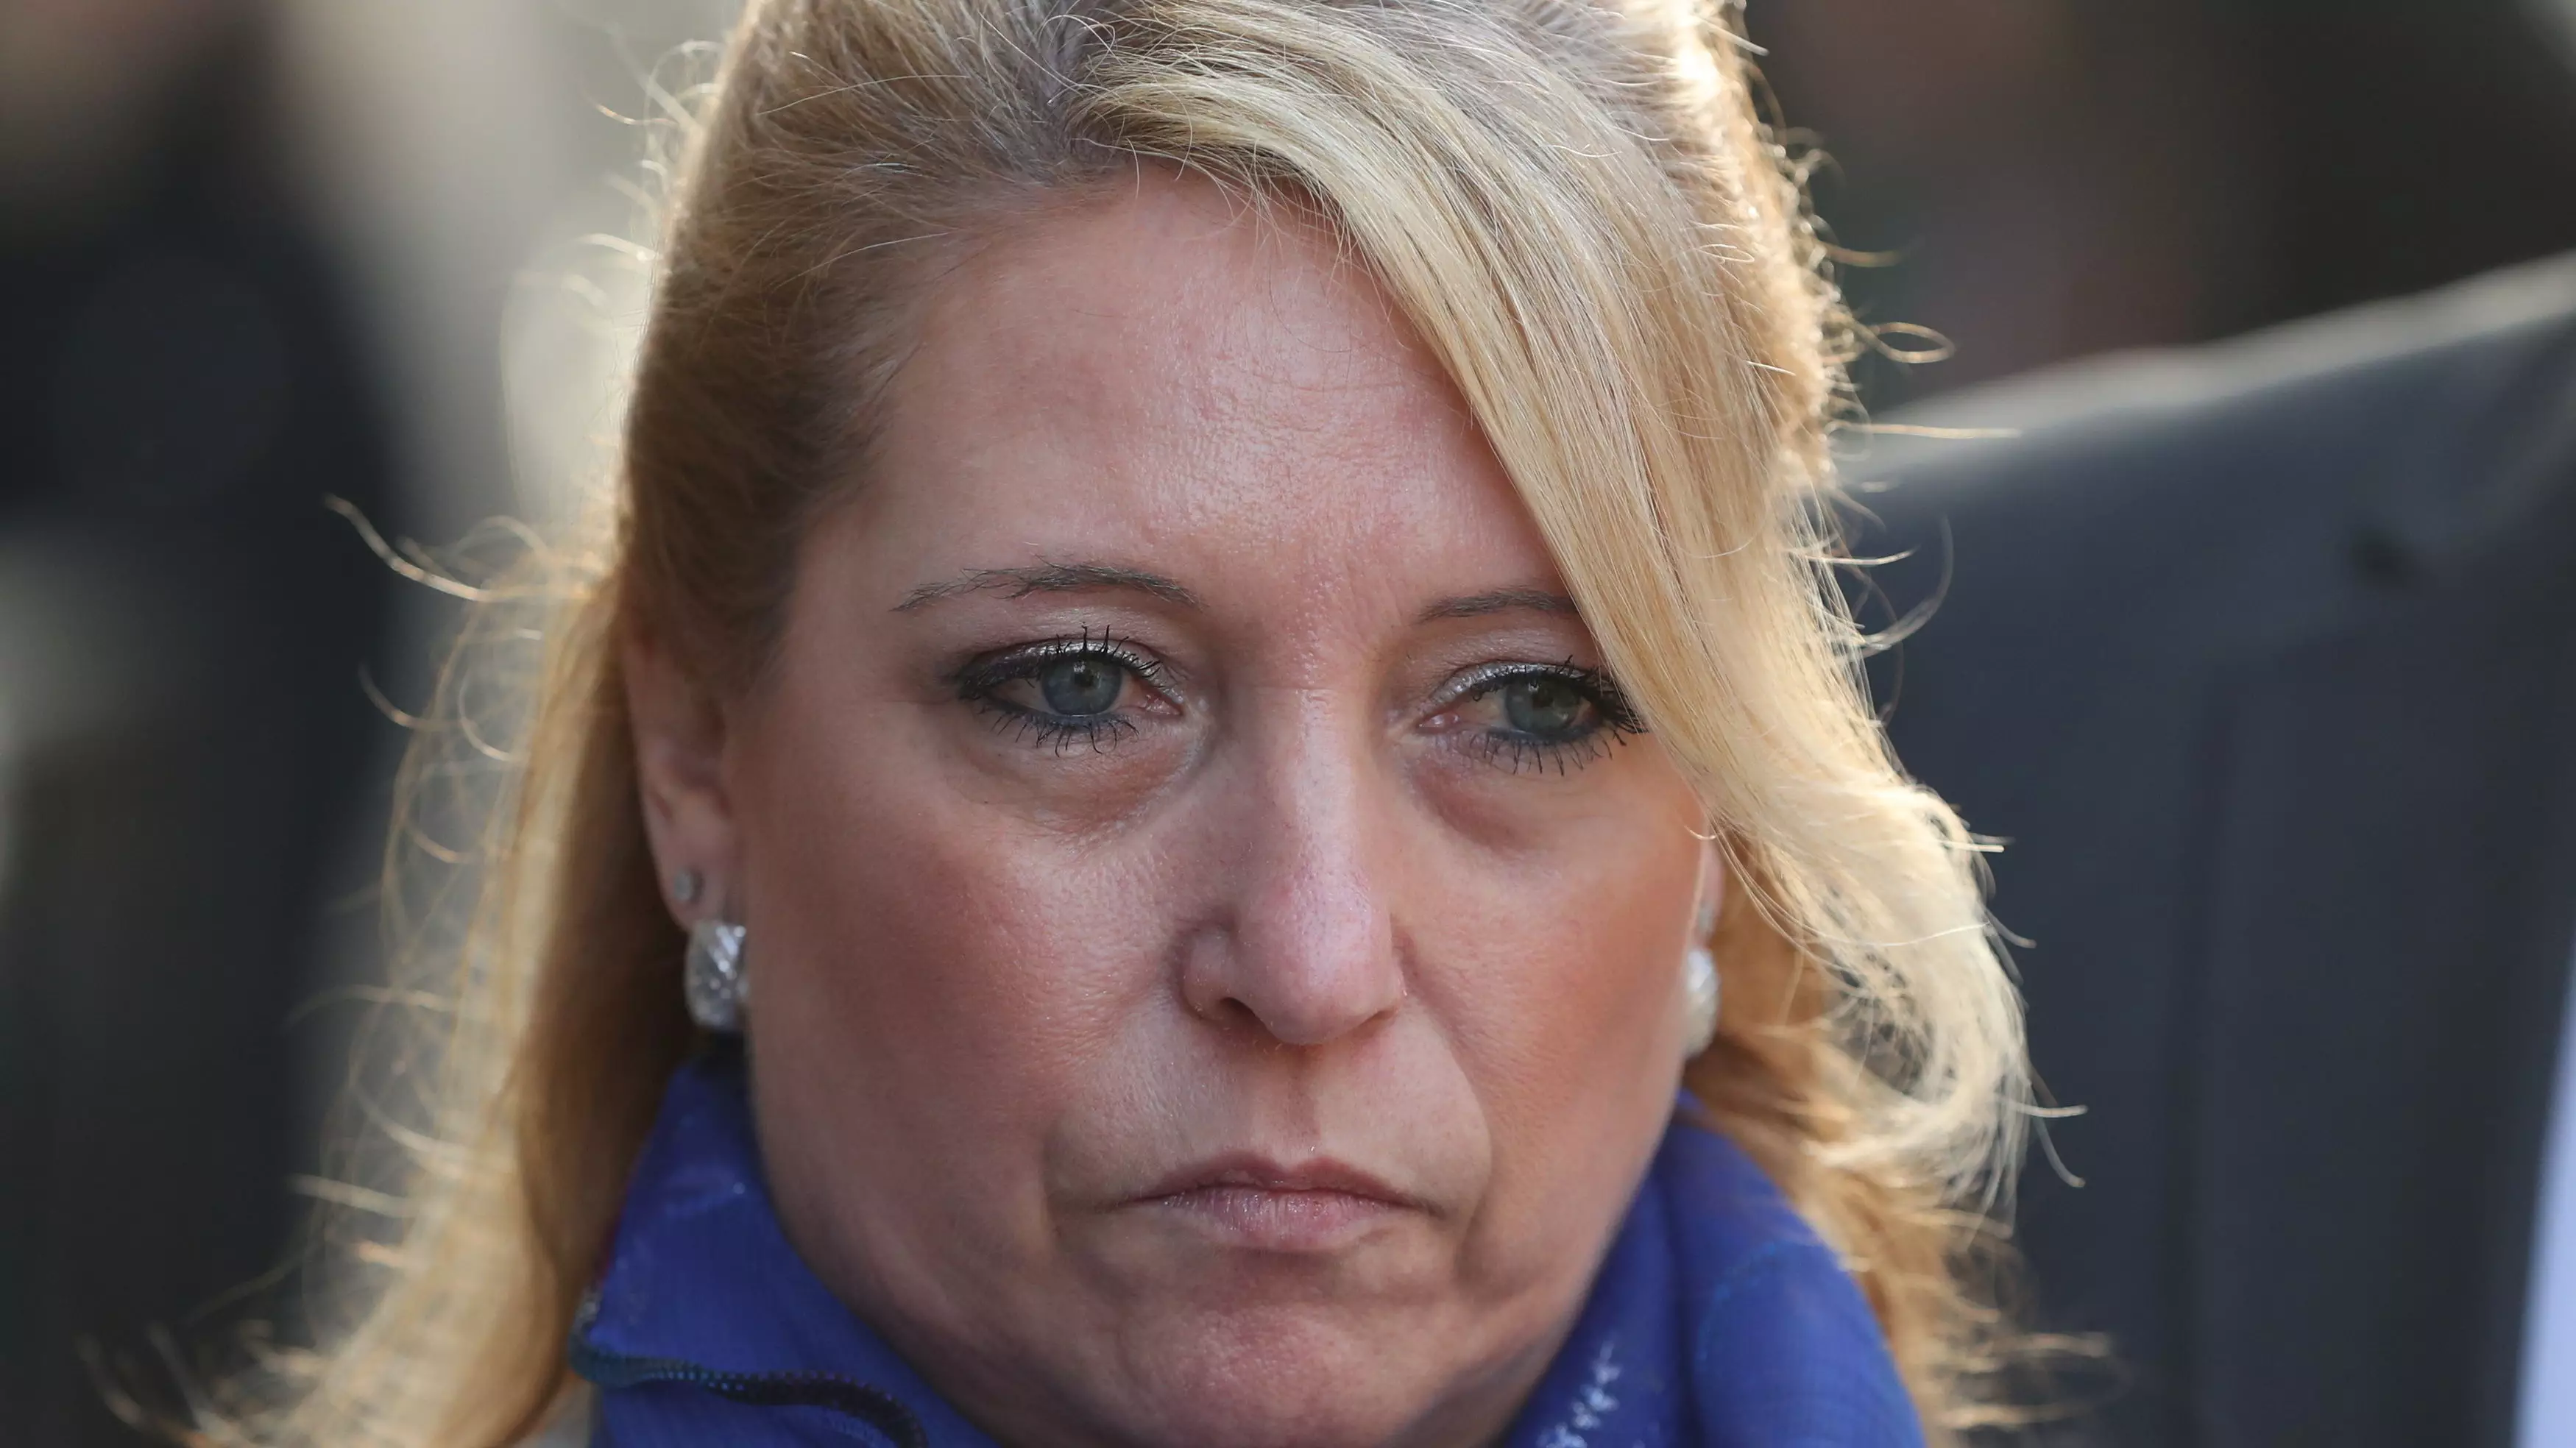 James Bulger’s Mum Says Her Son’s Killer Is ‘Laughing At Us’ From Prison